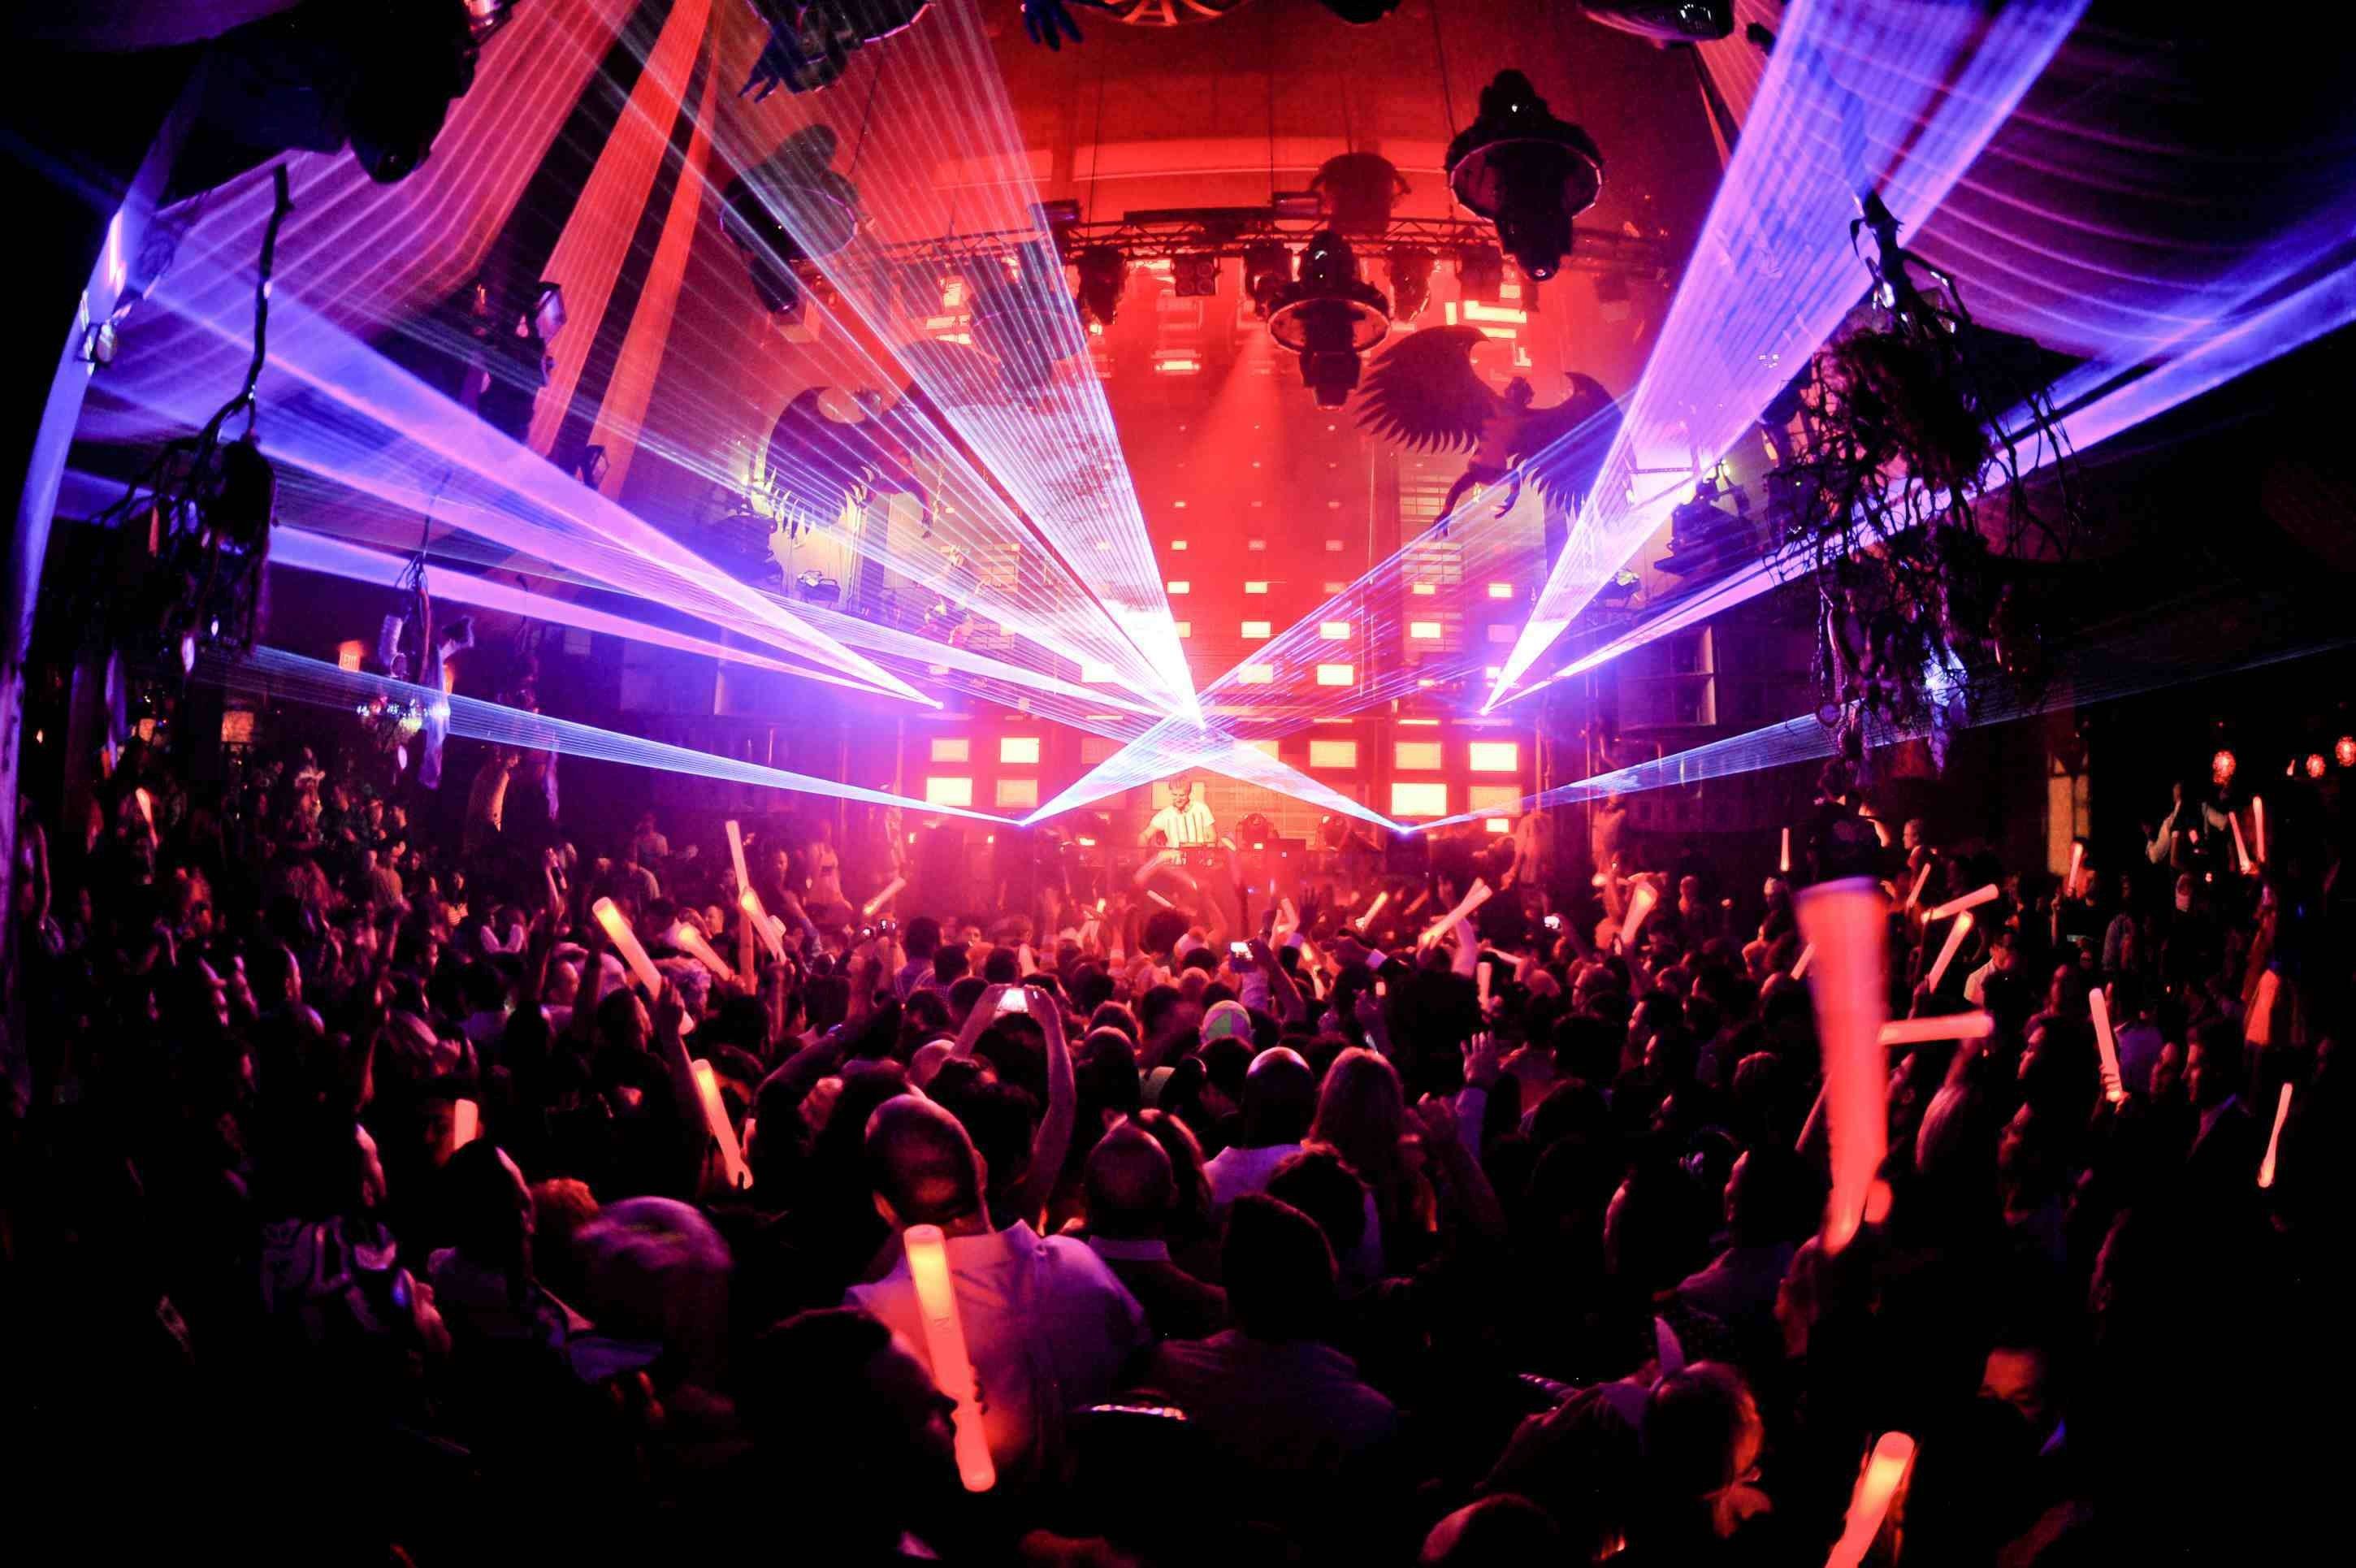 Night Club Wallpapers   Top Free Night Club Backgrounds